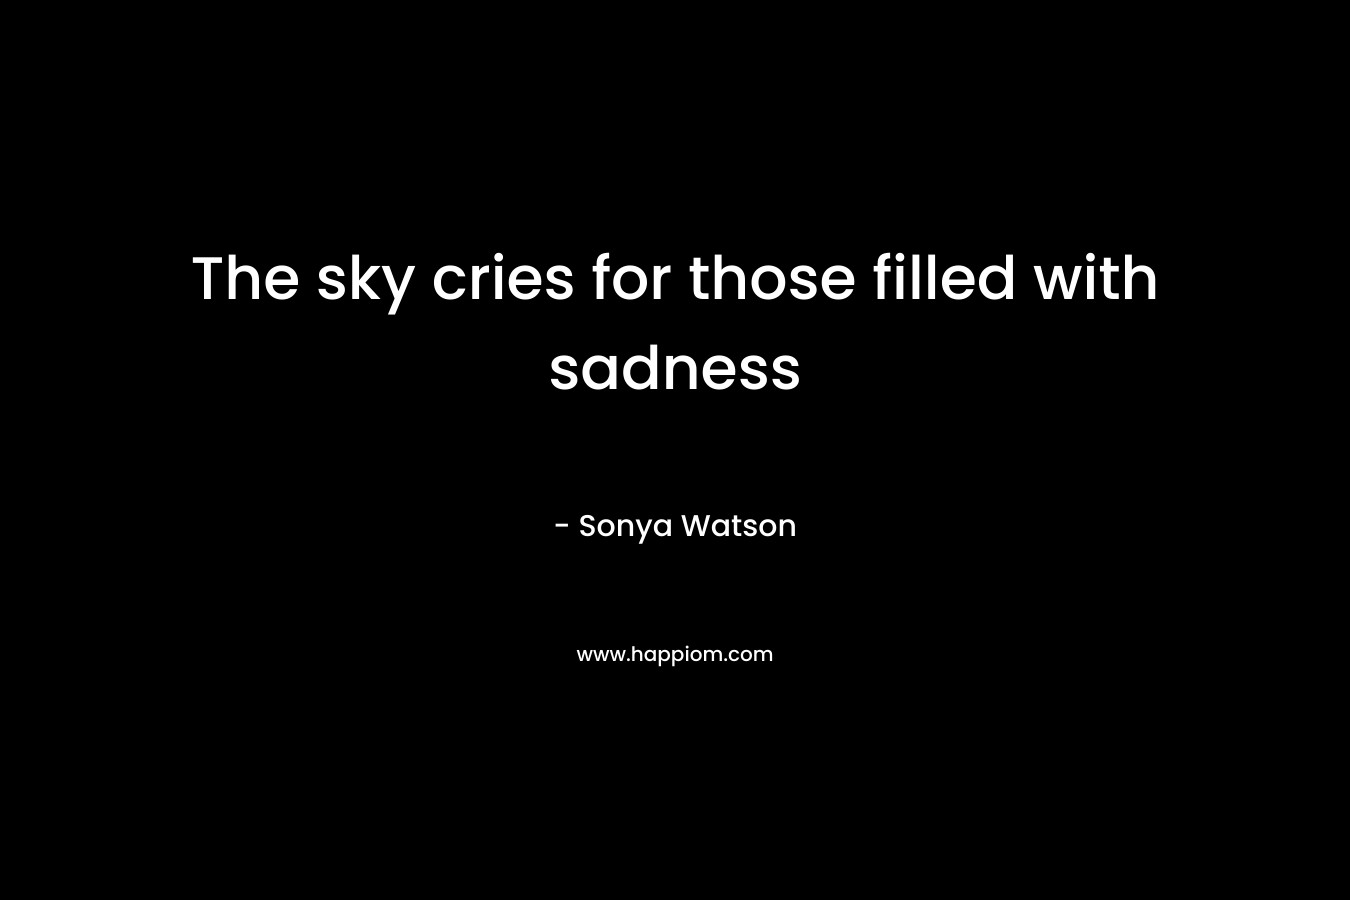 The sky cries for those filled with sadness